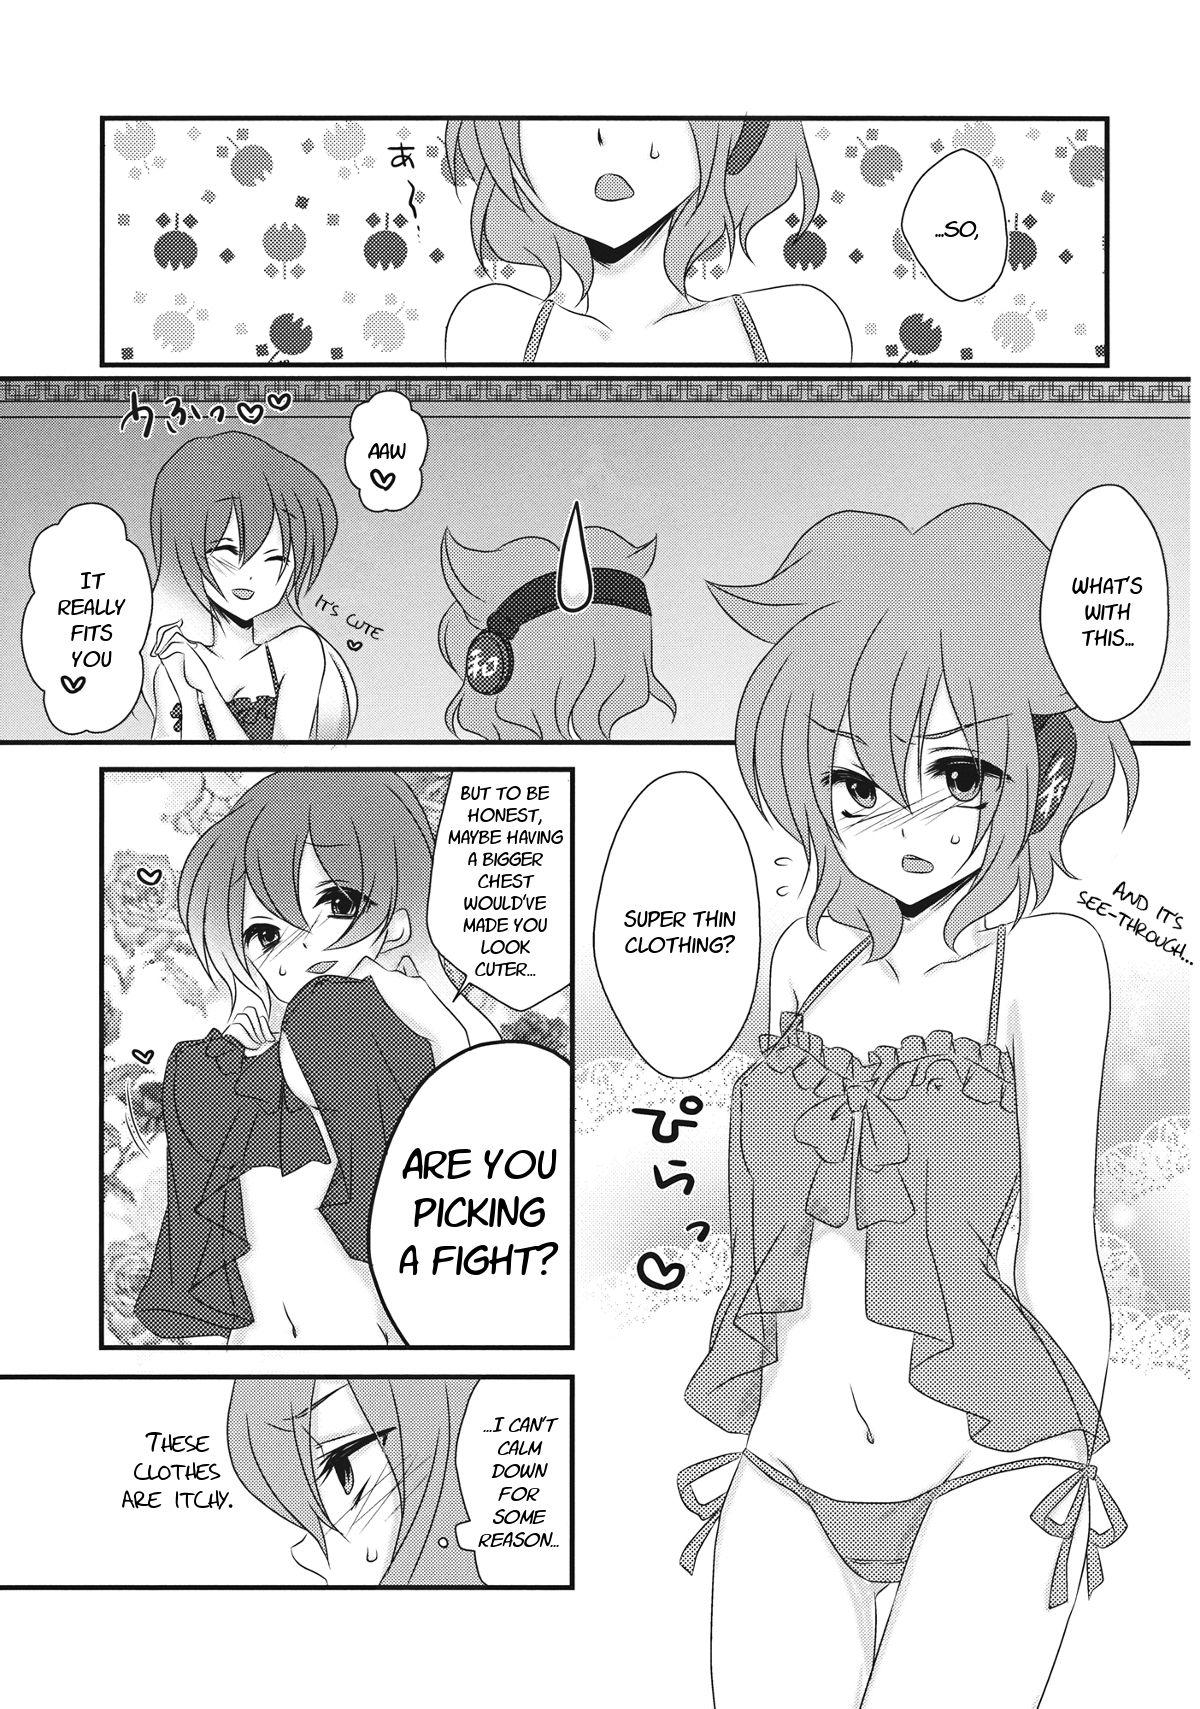 Anal Sex Koibito Gokko o Shimasenka? | Why Don't We Pretend to Be Lovers - Touhou project Gay Medical - Page 8